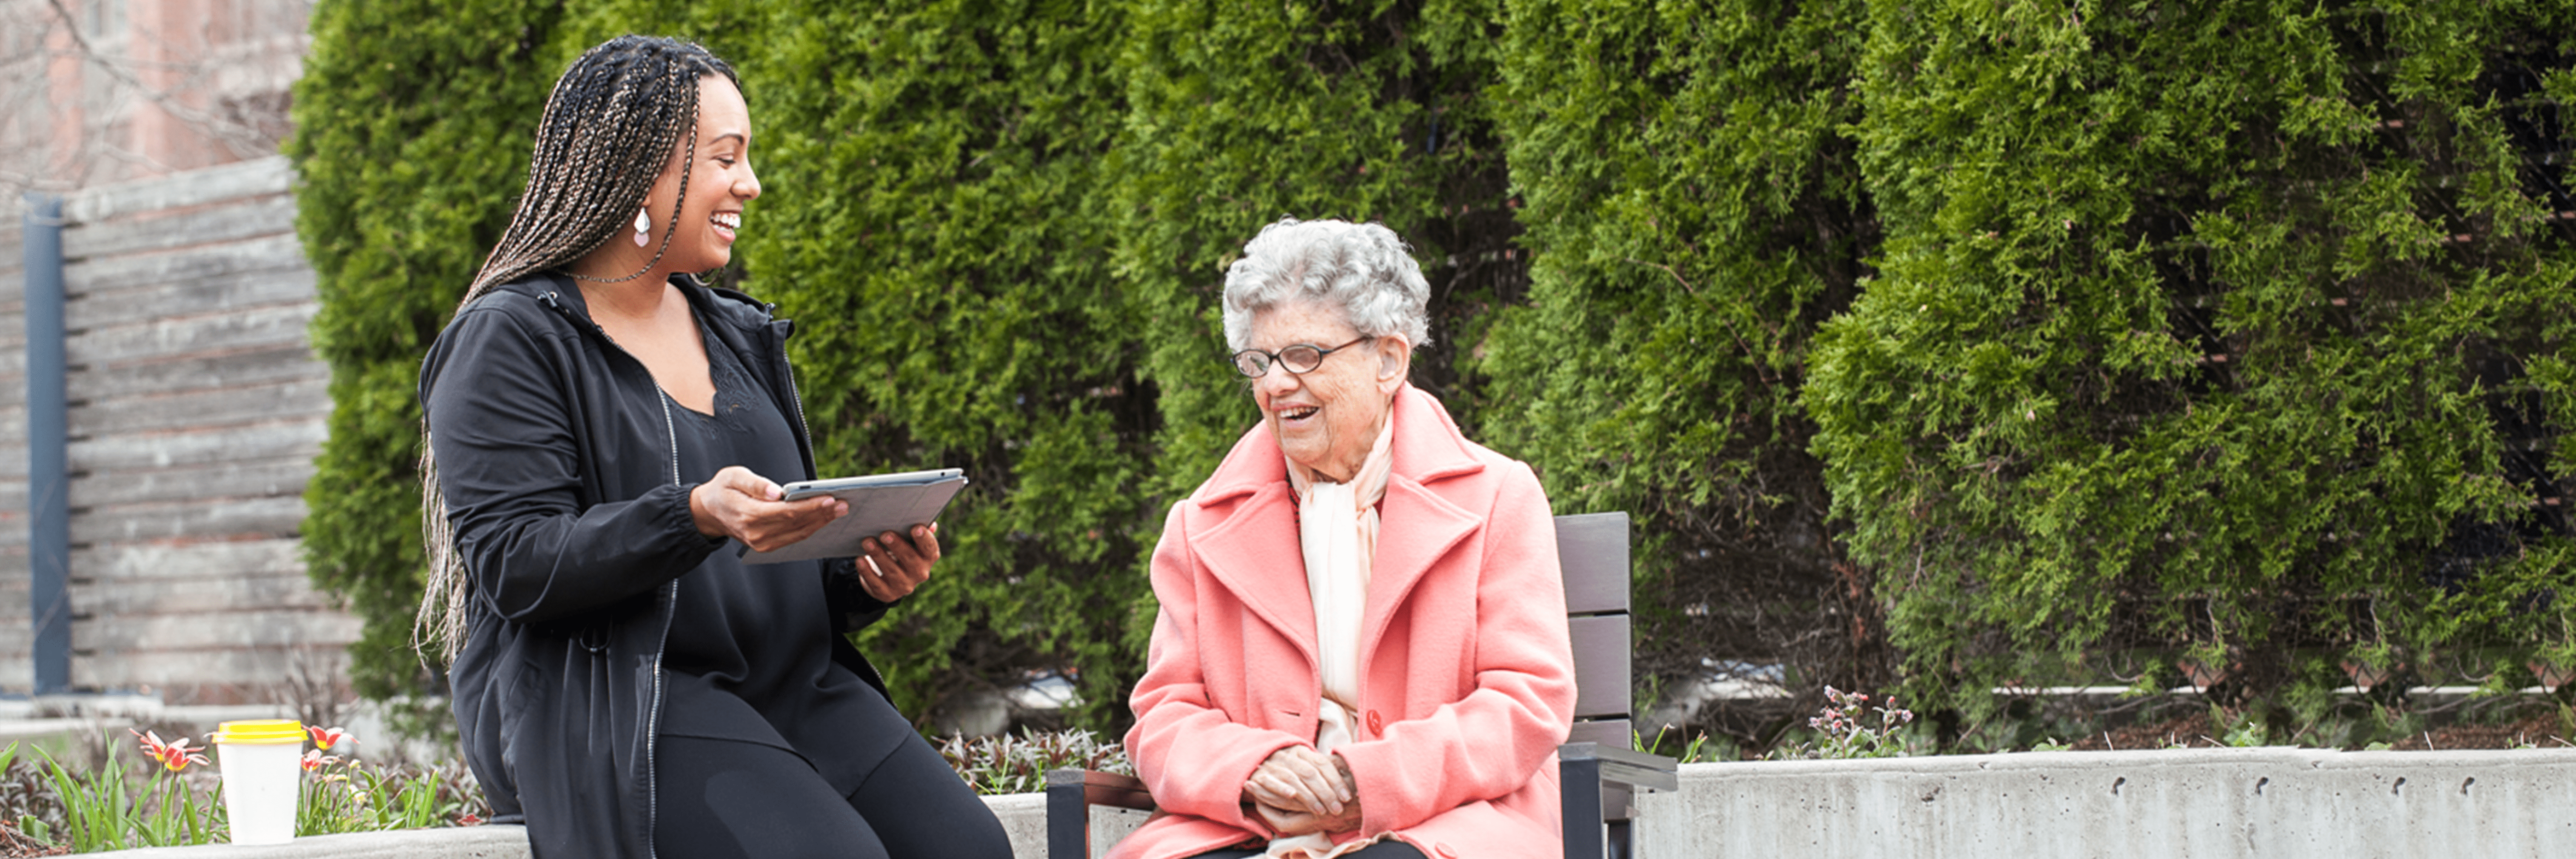 An intervenor sits beside a client outside. The intervenor uses a tablet to type large print notes to communicate with the client.